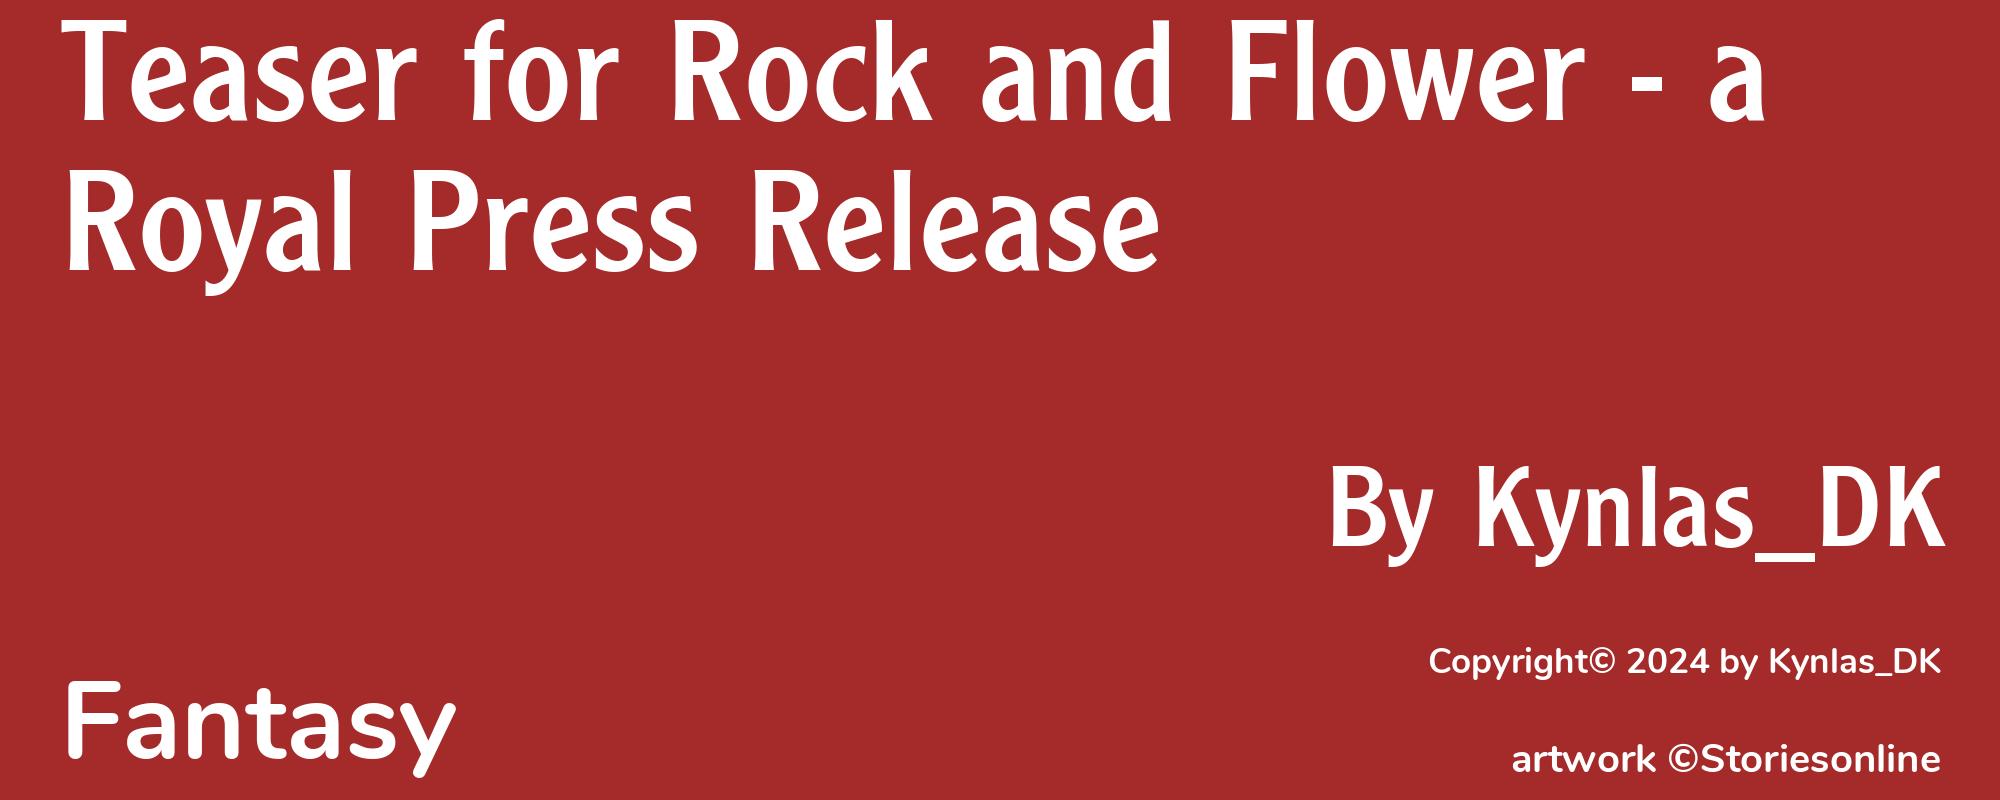 Teaser for Rock and Flower - a Royal Press Release - Cover